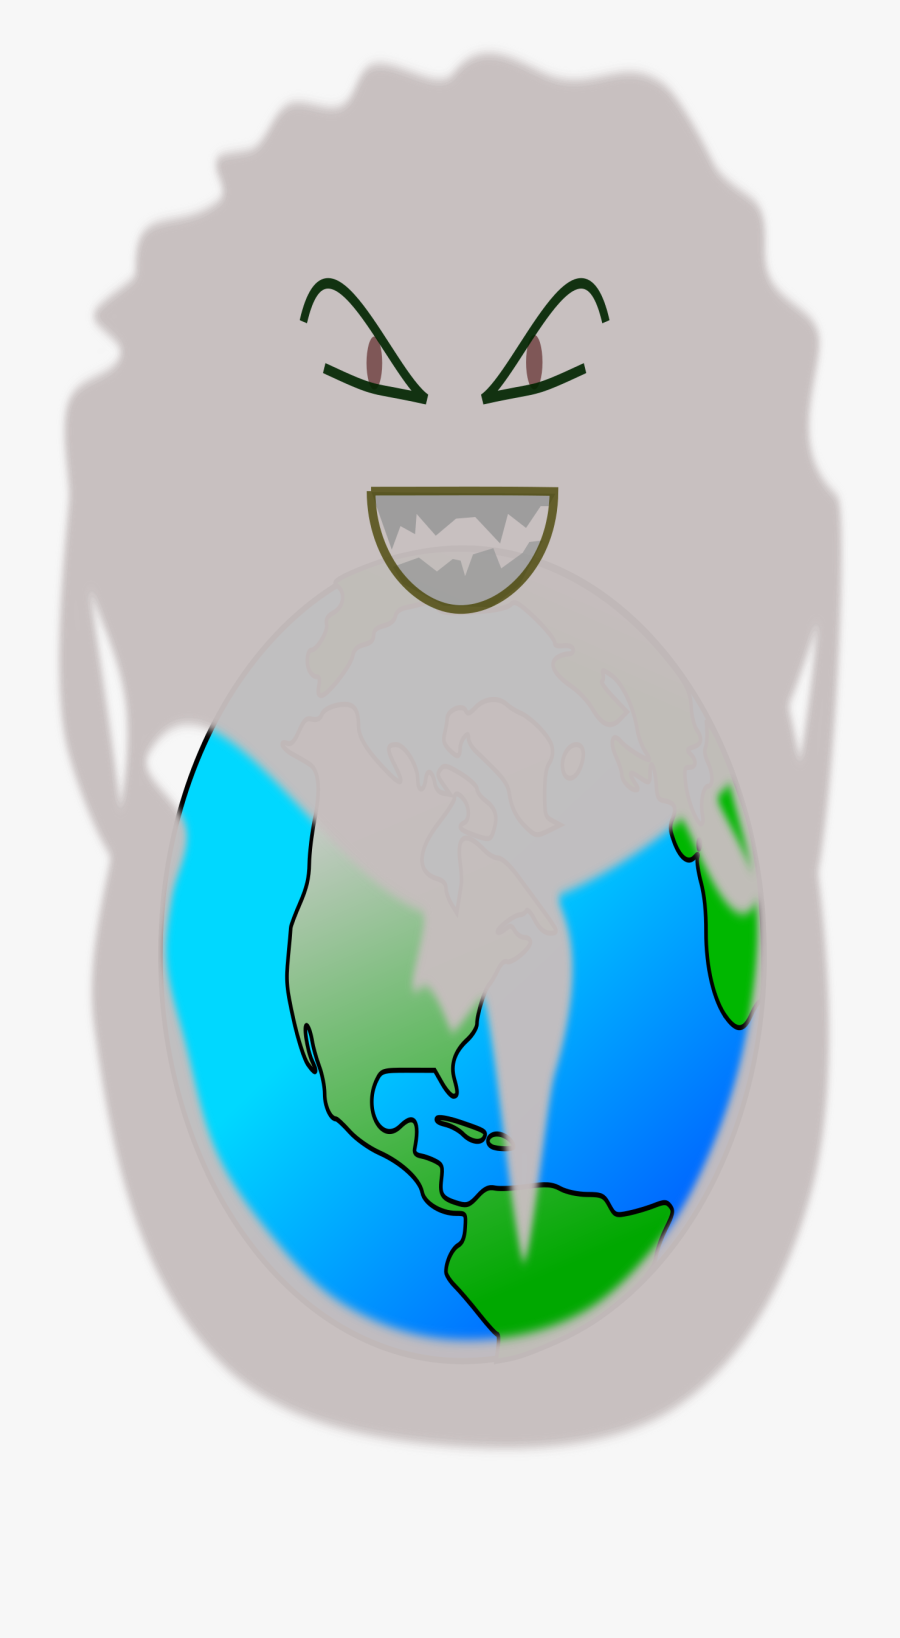 Earth Clipart Pollution - Earth Pollution Clipart Png, Transparent Clipart